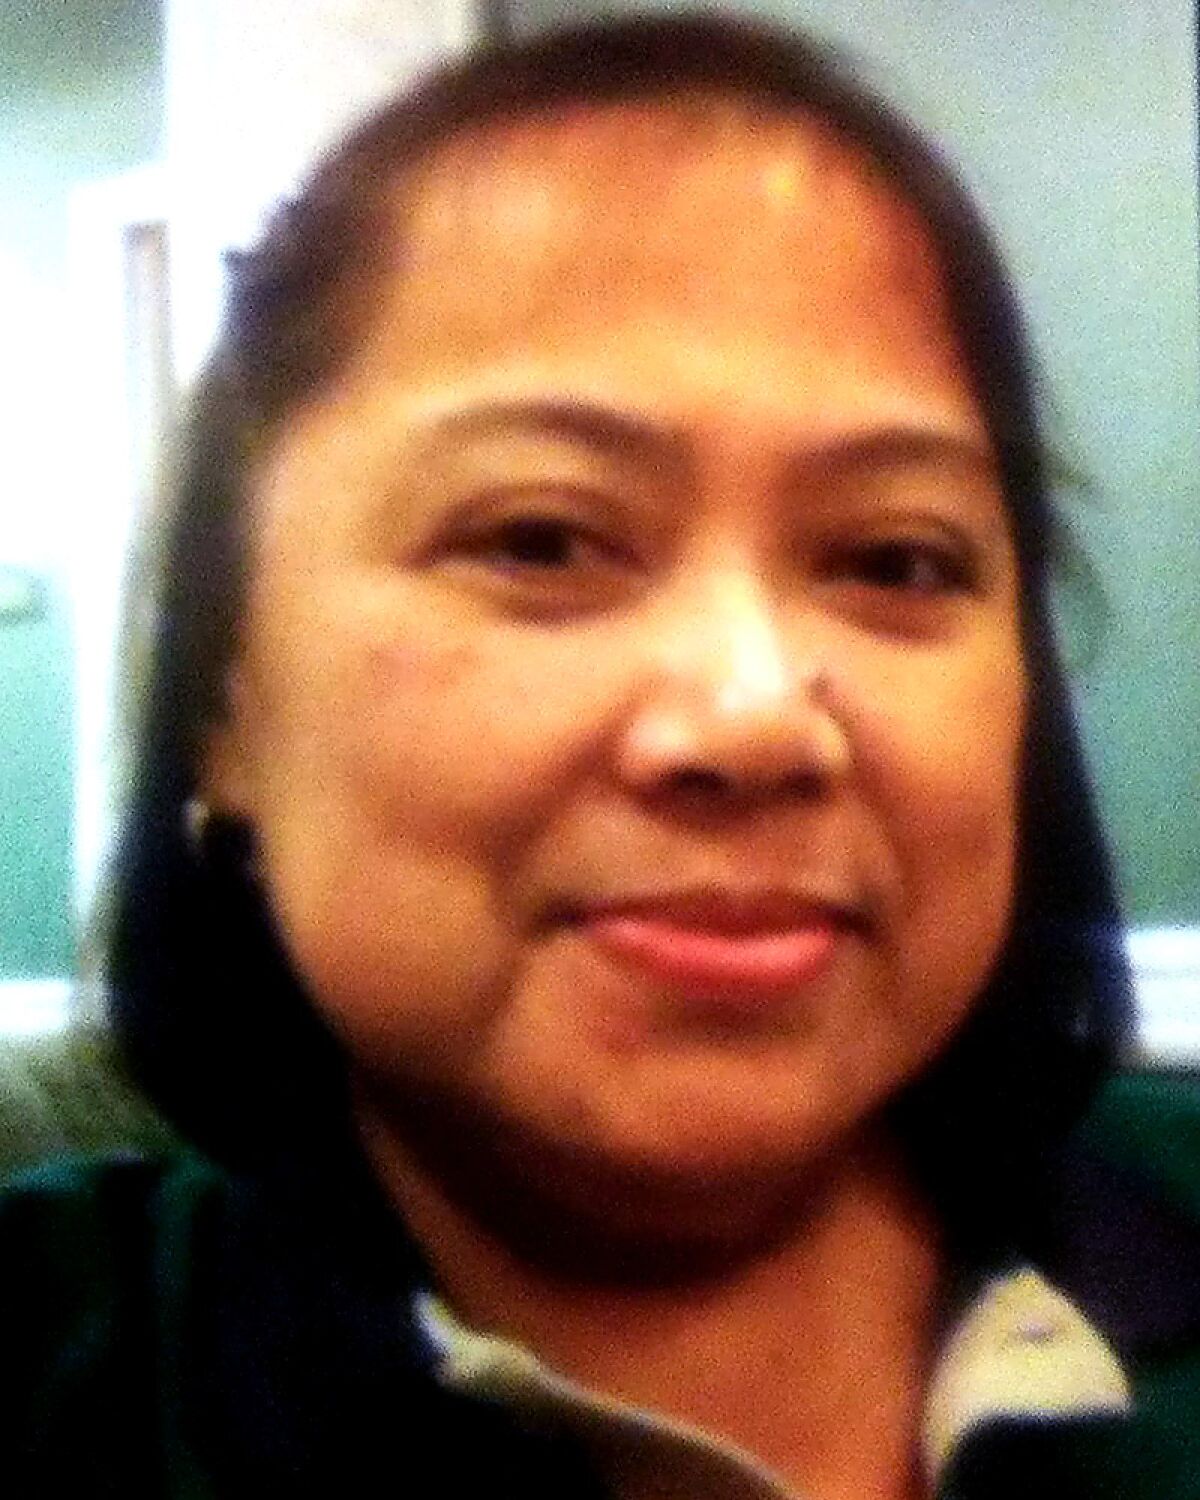 Dulce Amor Aguilo is among Filipino Americans to have died of COVID-19.